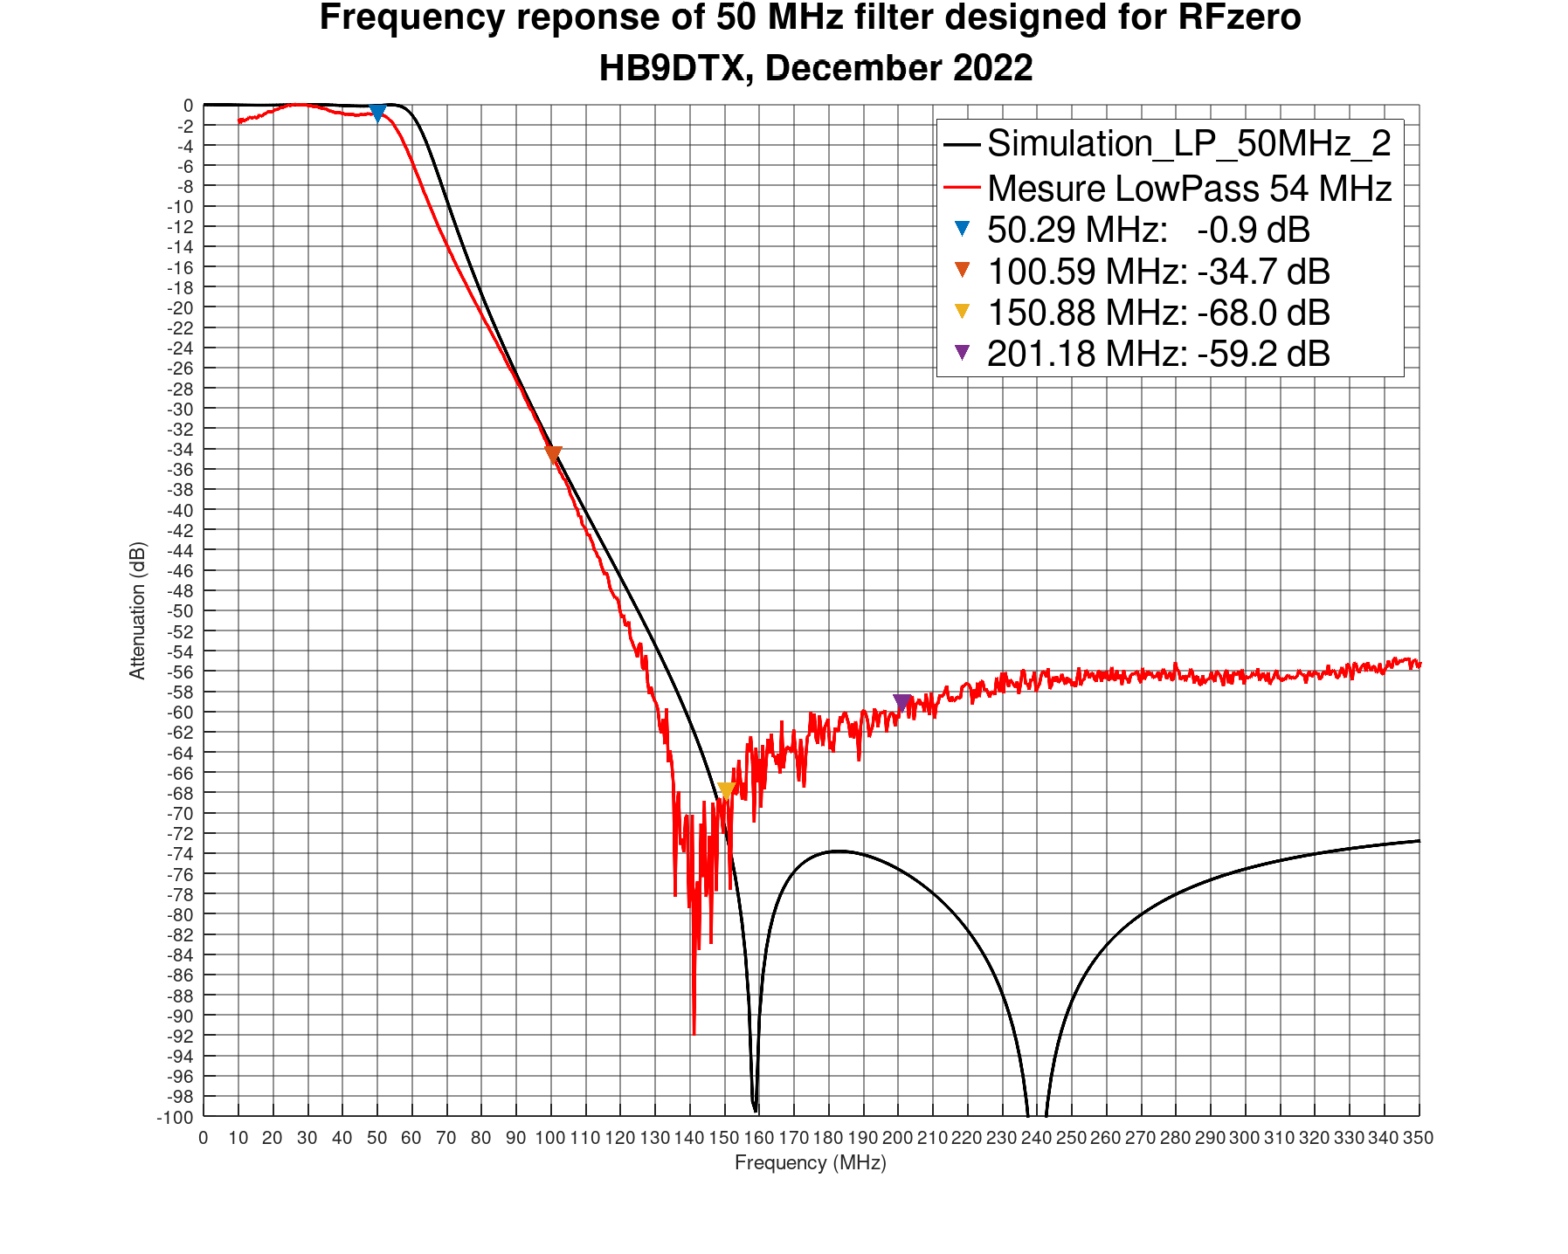 50 MHz frequency response graph